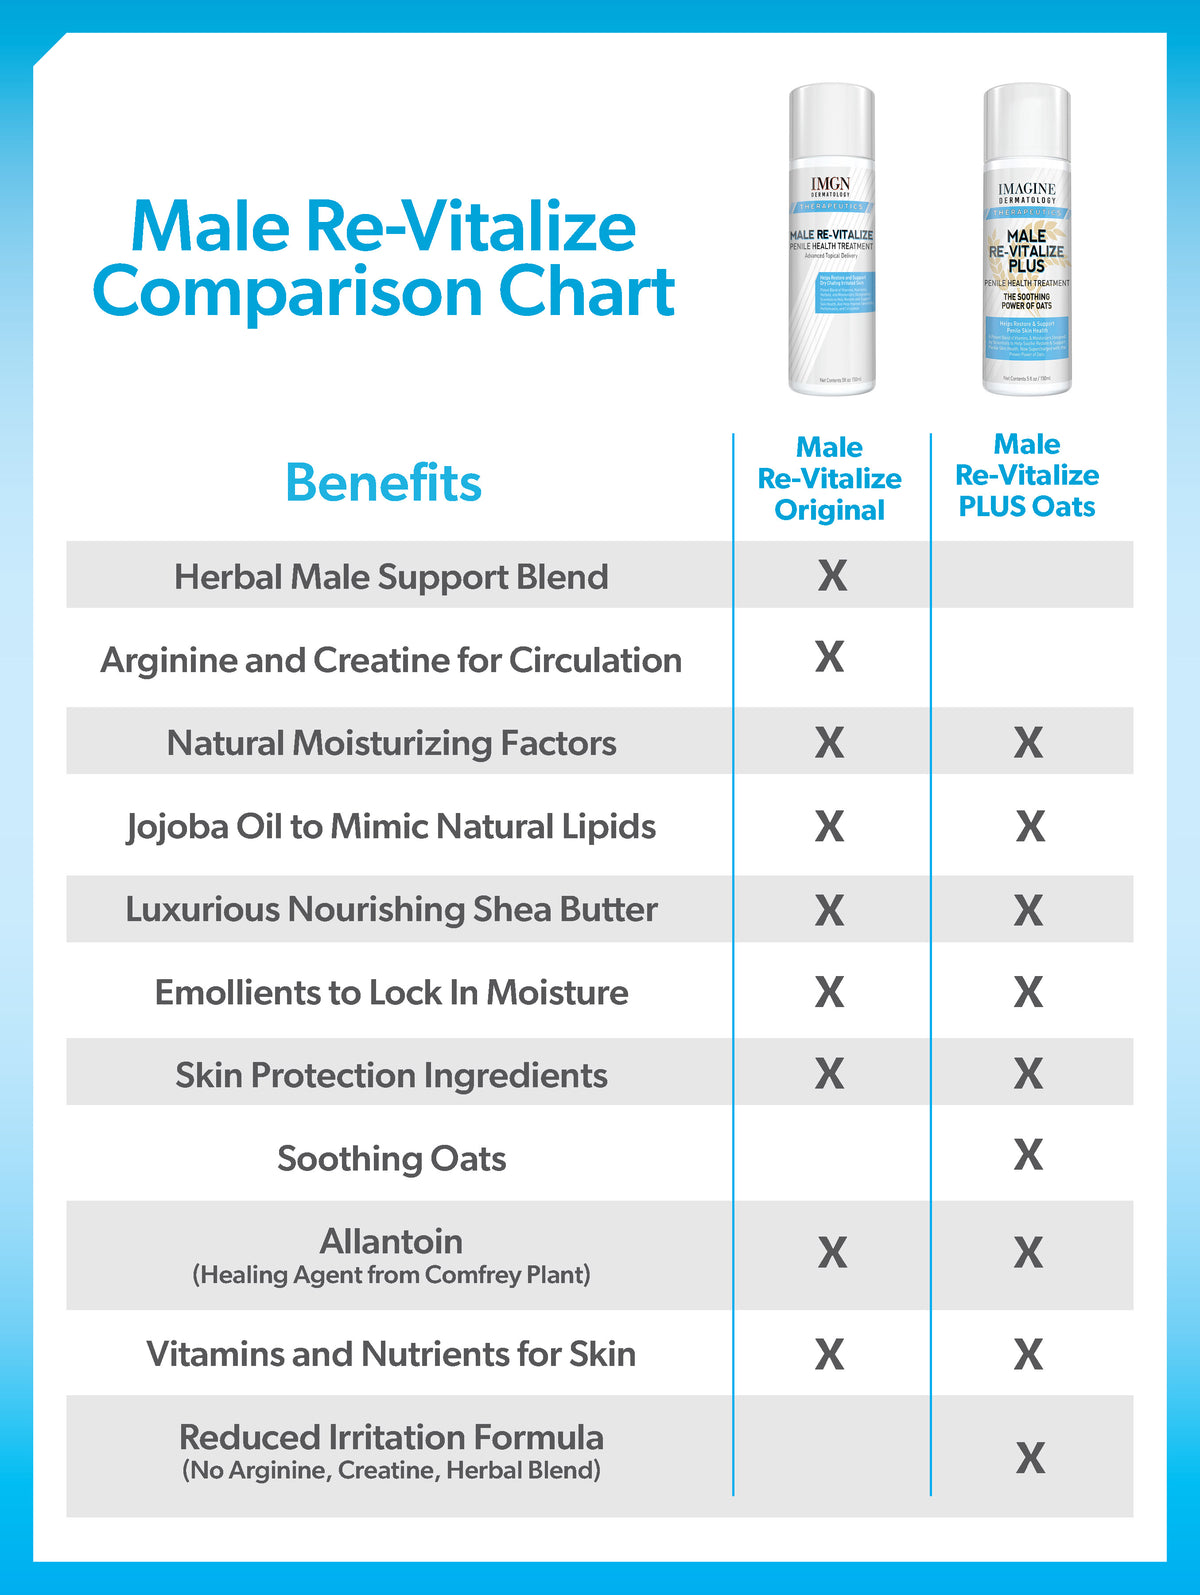 Male Re-Vitalize PLUS Oats Penile Health Relief Cream Restore and Support Skin Large Value Size (5fl oz/ 150ml) 90 Day Return For Any Reason